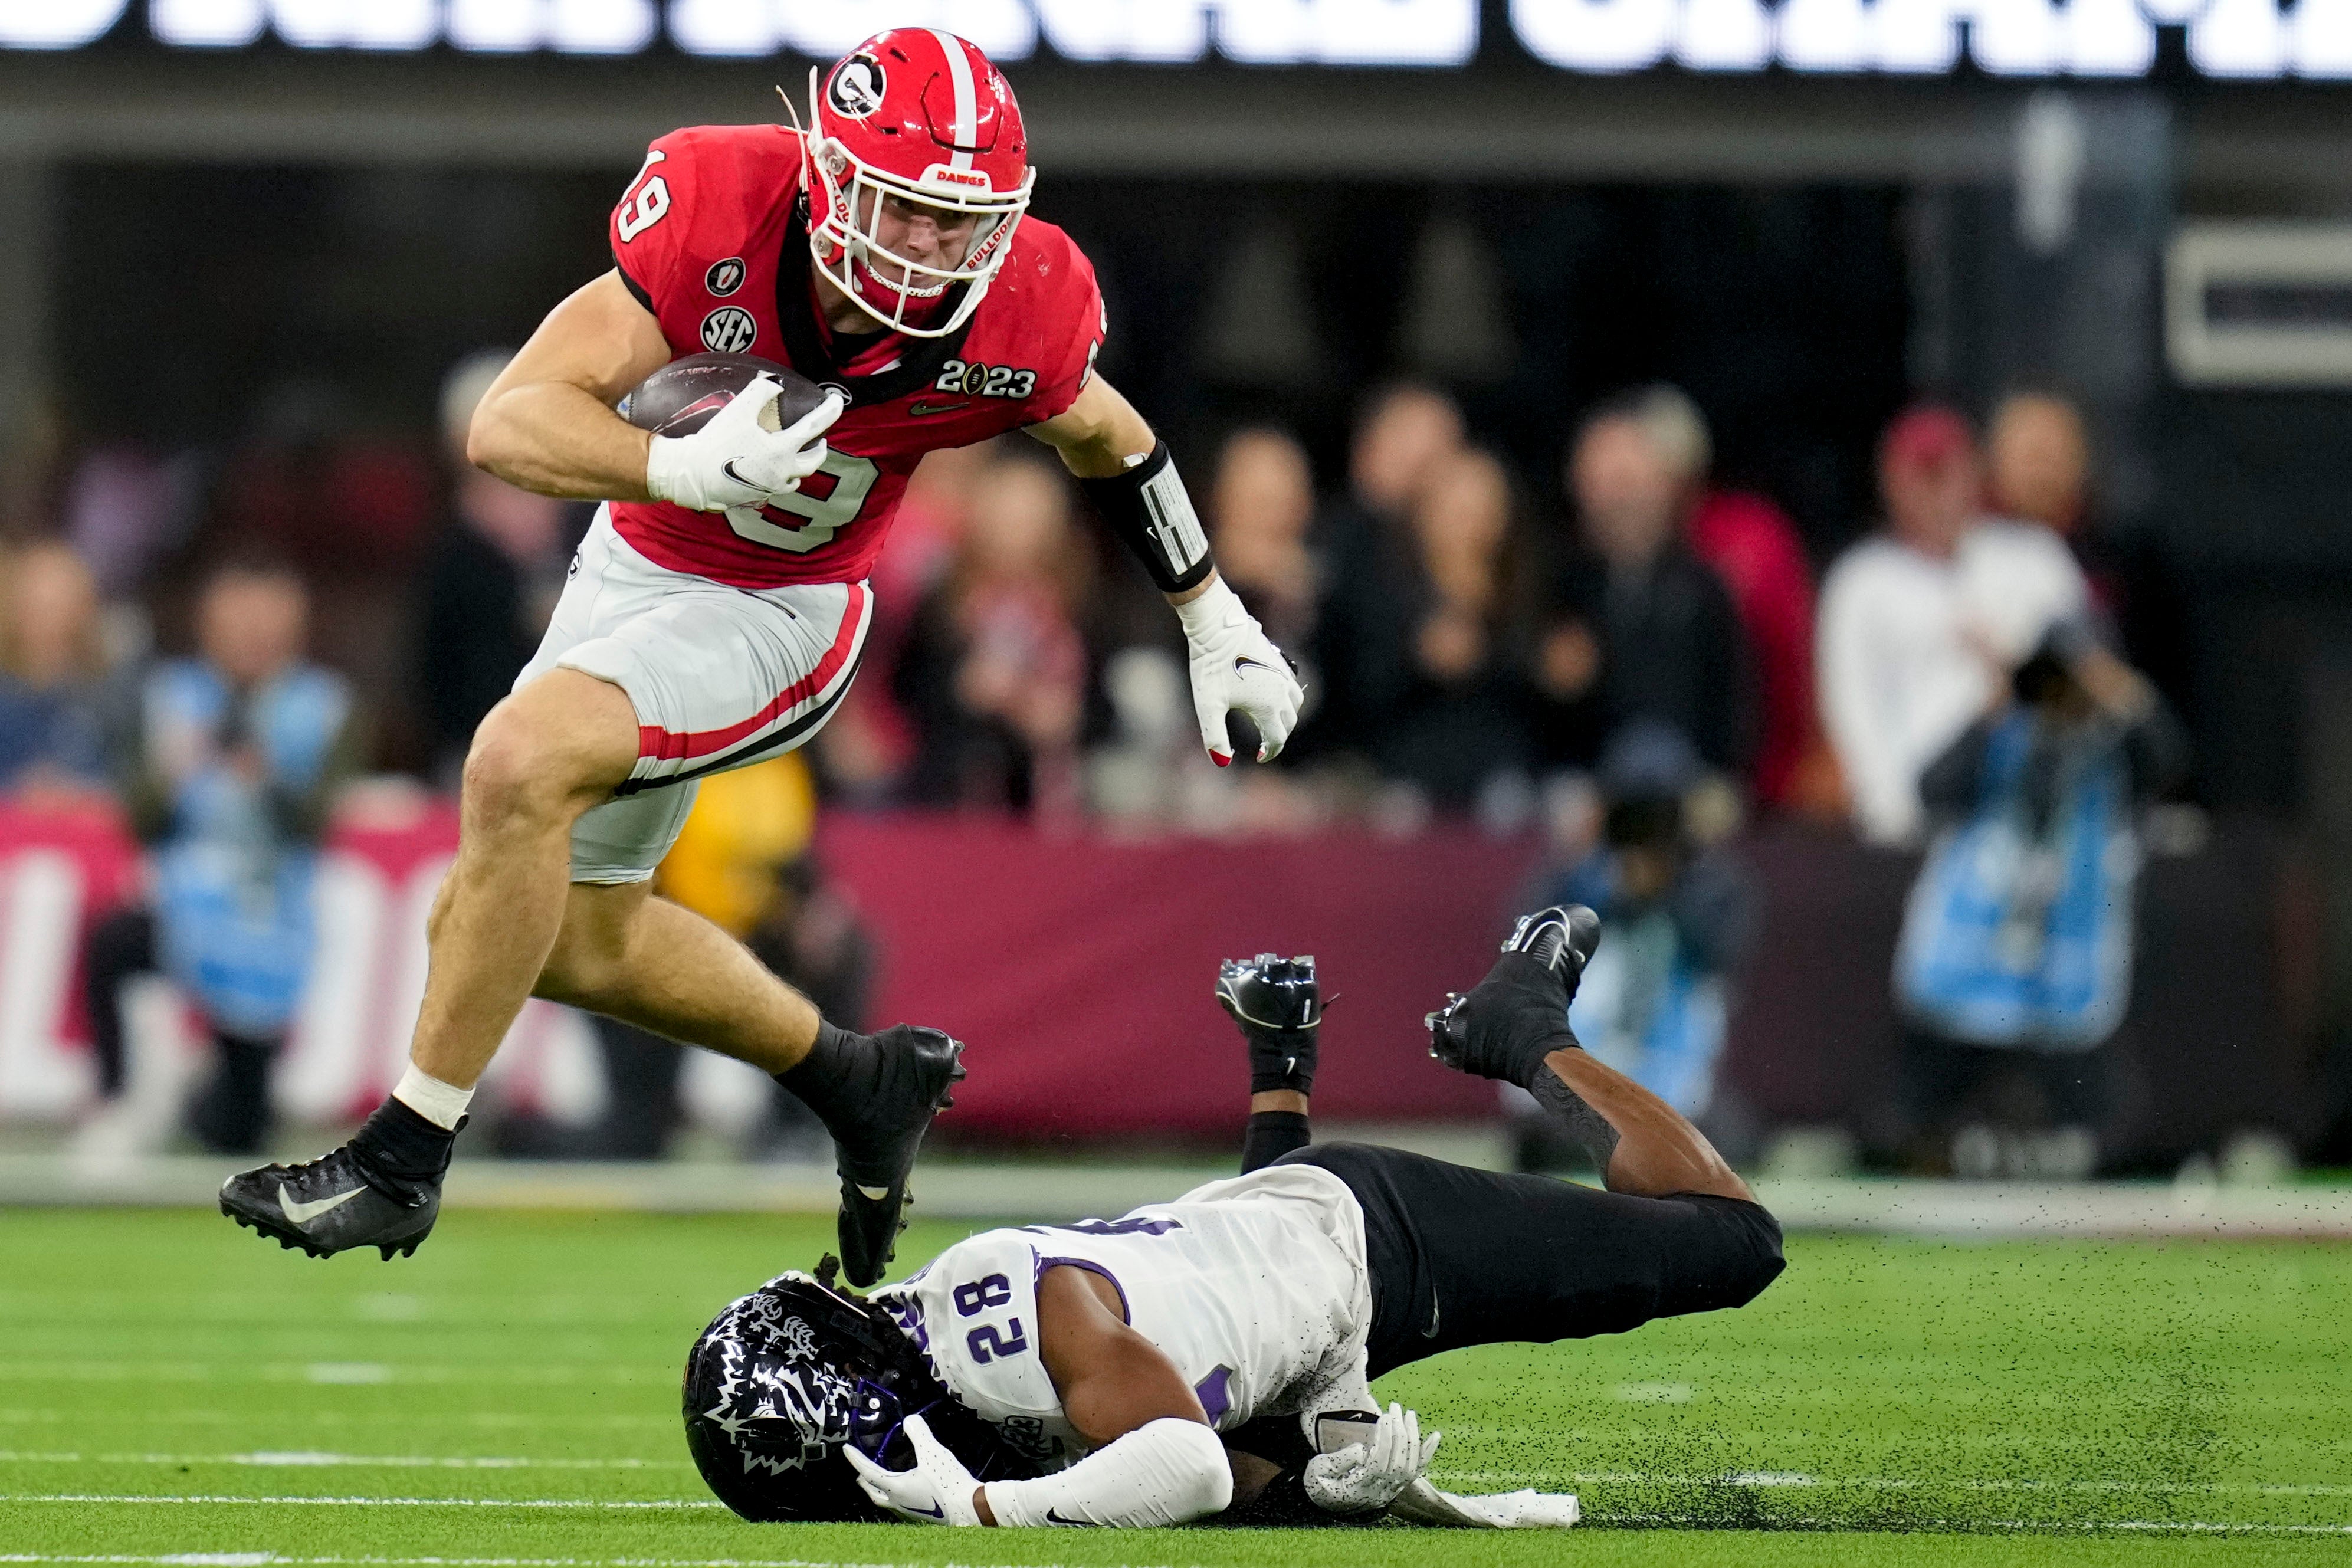 Brock Bowers offers athleticism at the tight end position